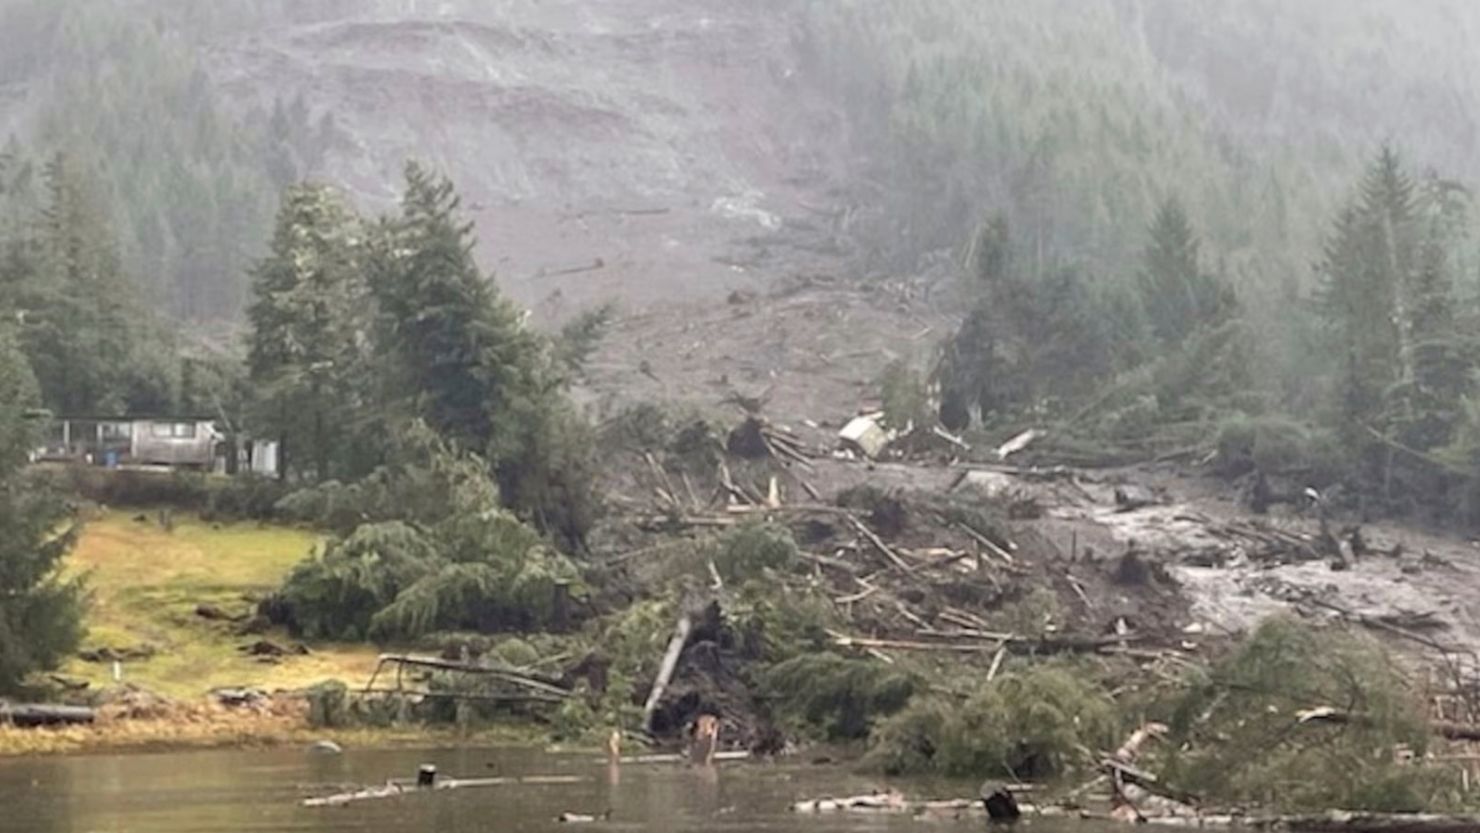 About 20 people rescued after landslide on Zimovia Highway in Wrangell